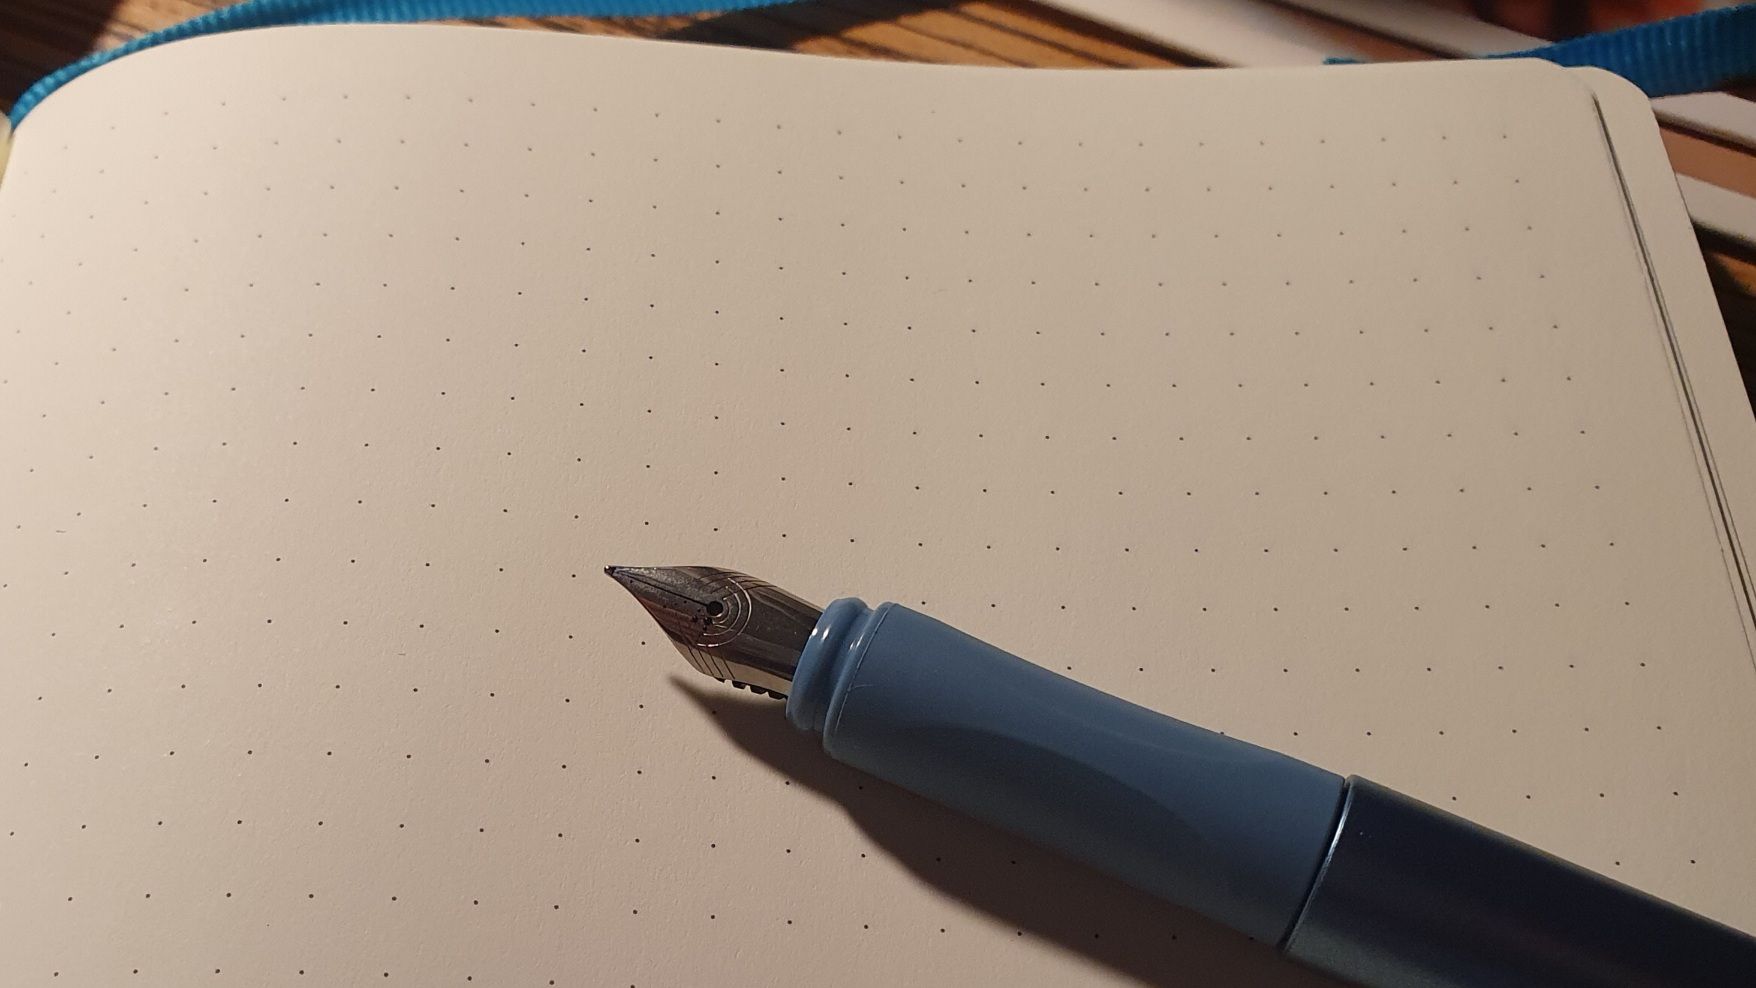 An uncapped fountain pen on an empty page of a dotted page in a journal